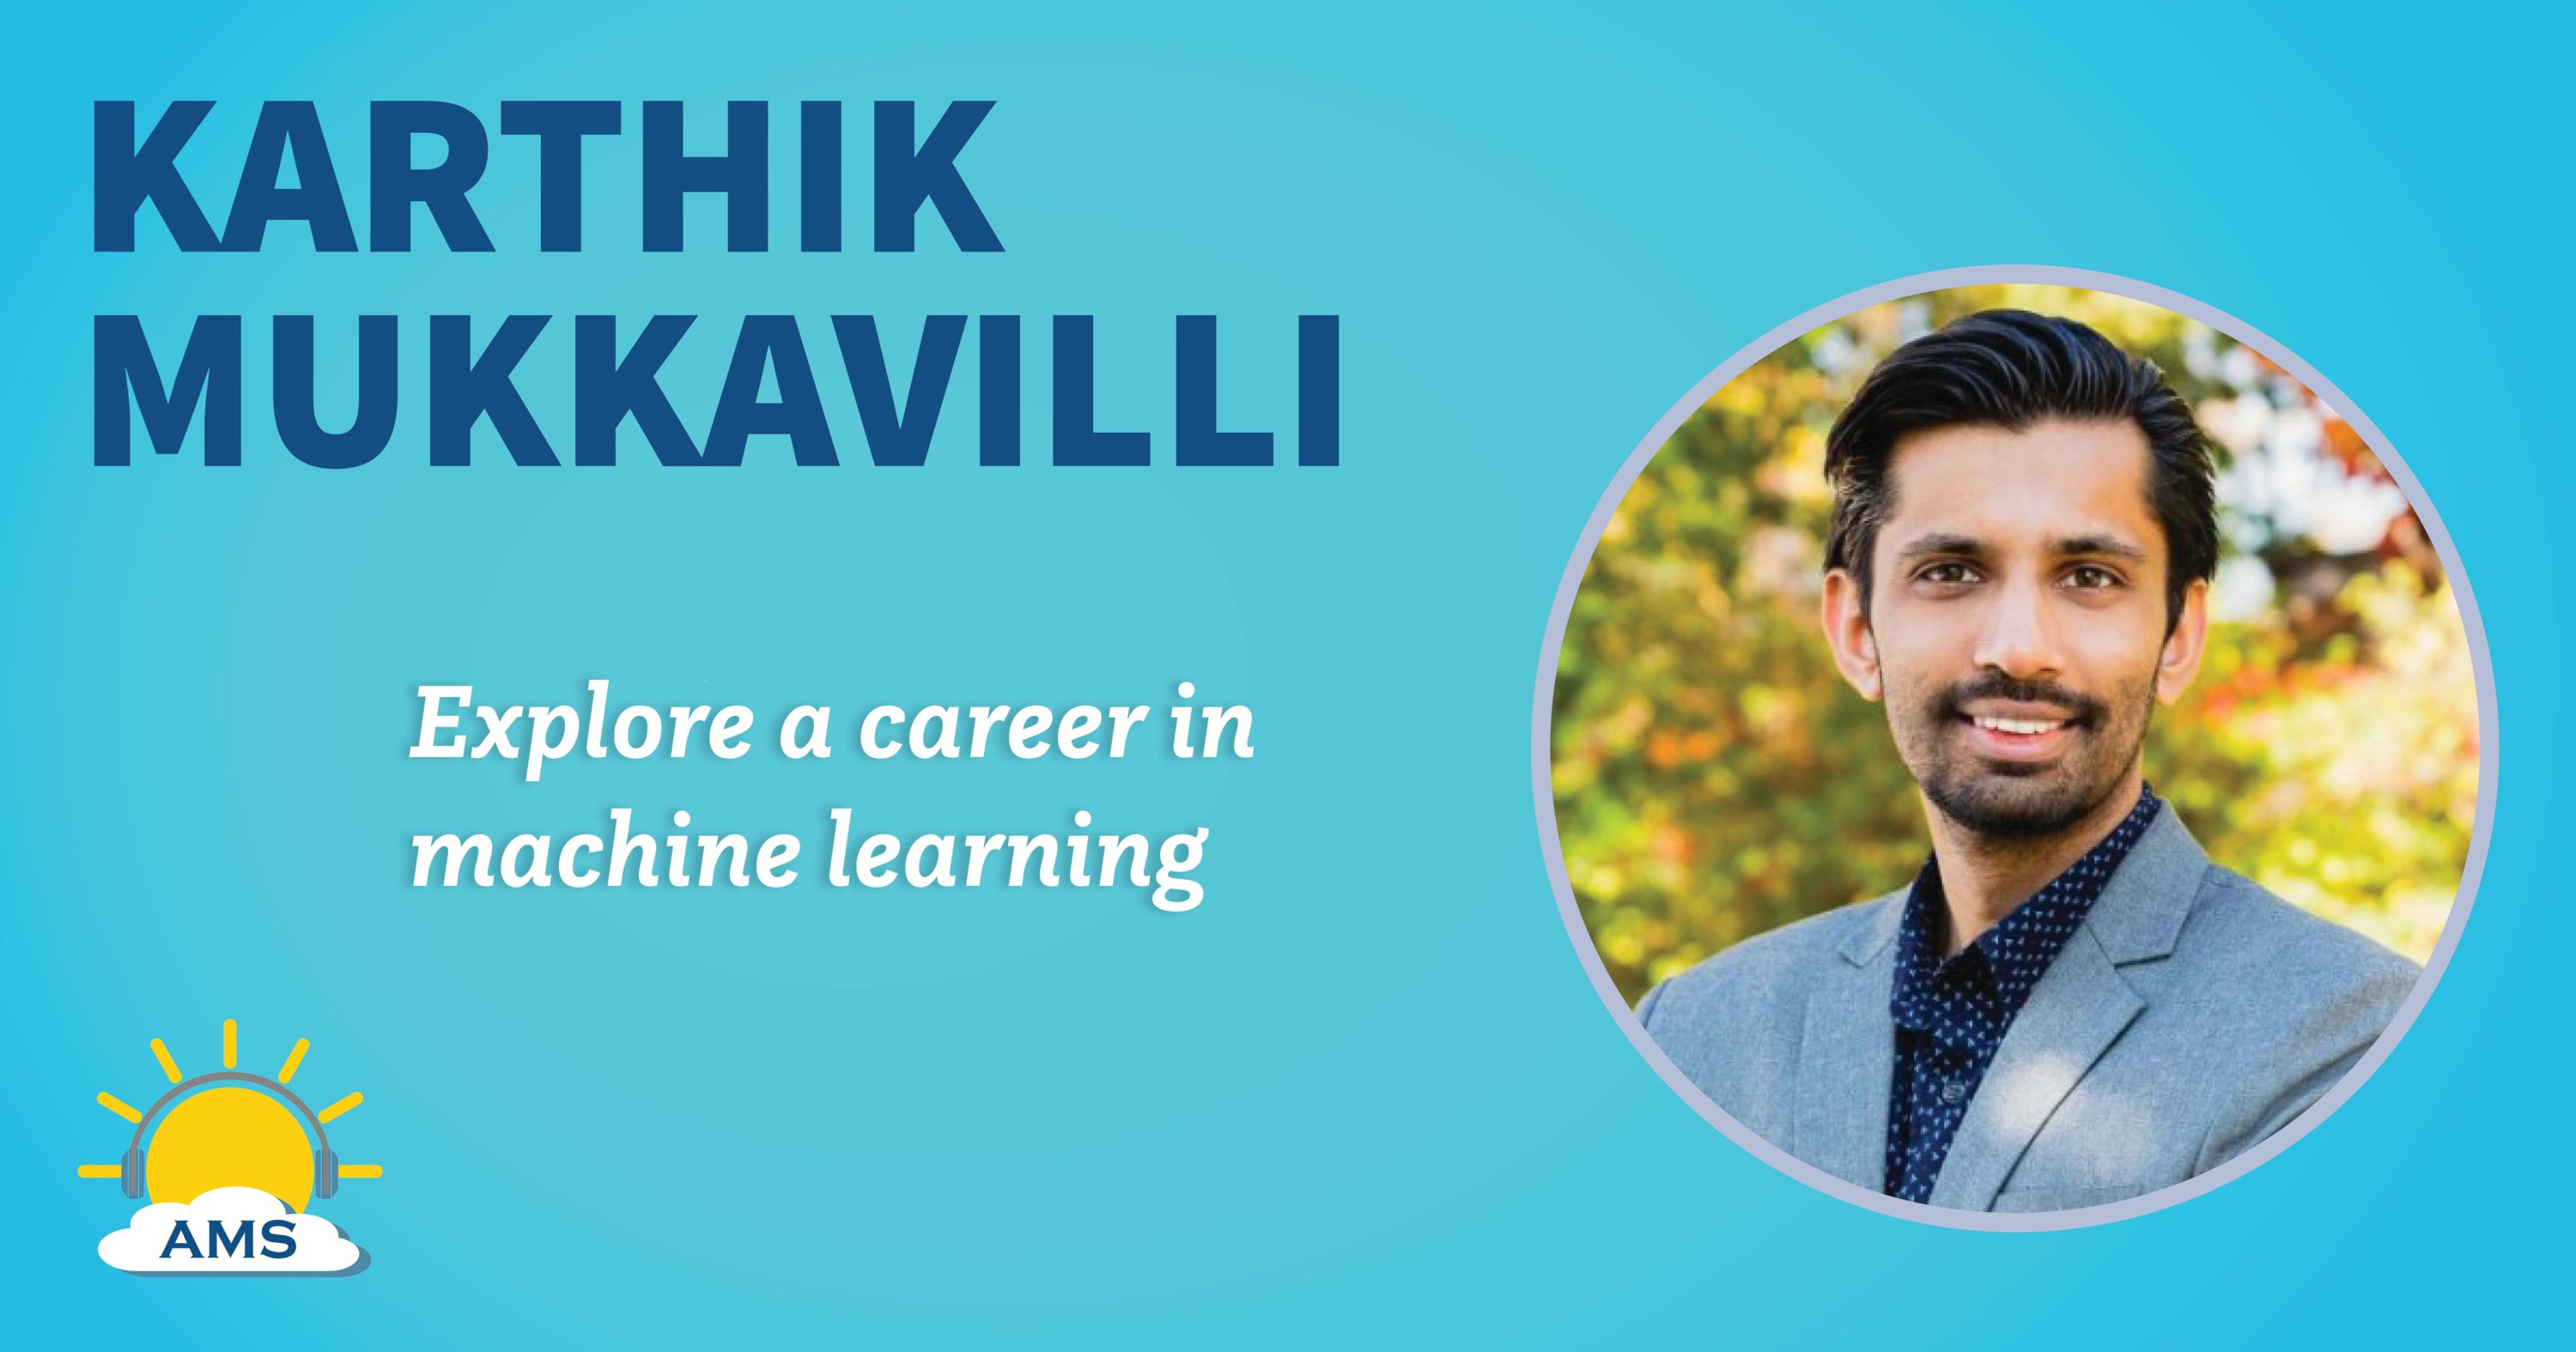 karthik mukkavilli headshot graphic with teaser text that reads &quotexplore a career in machine learning"